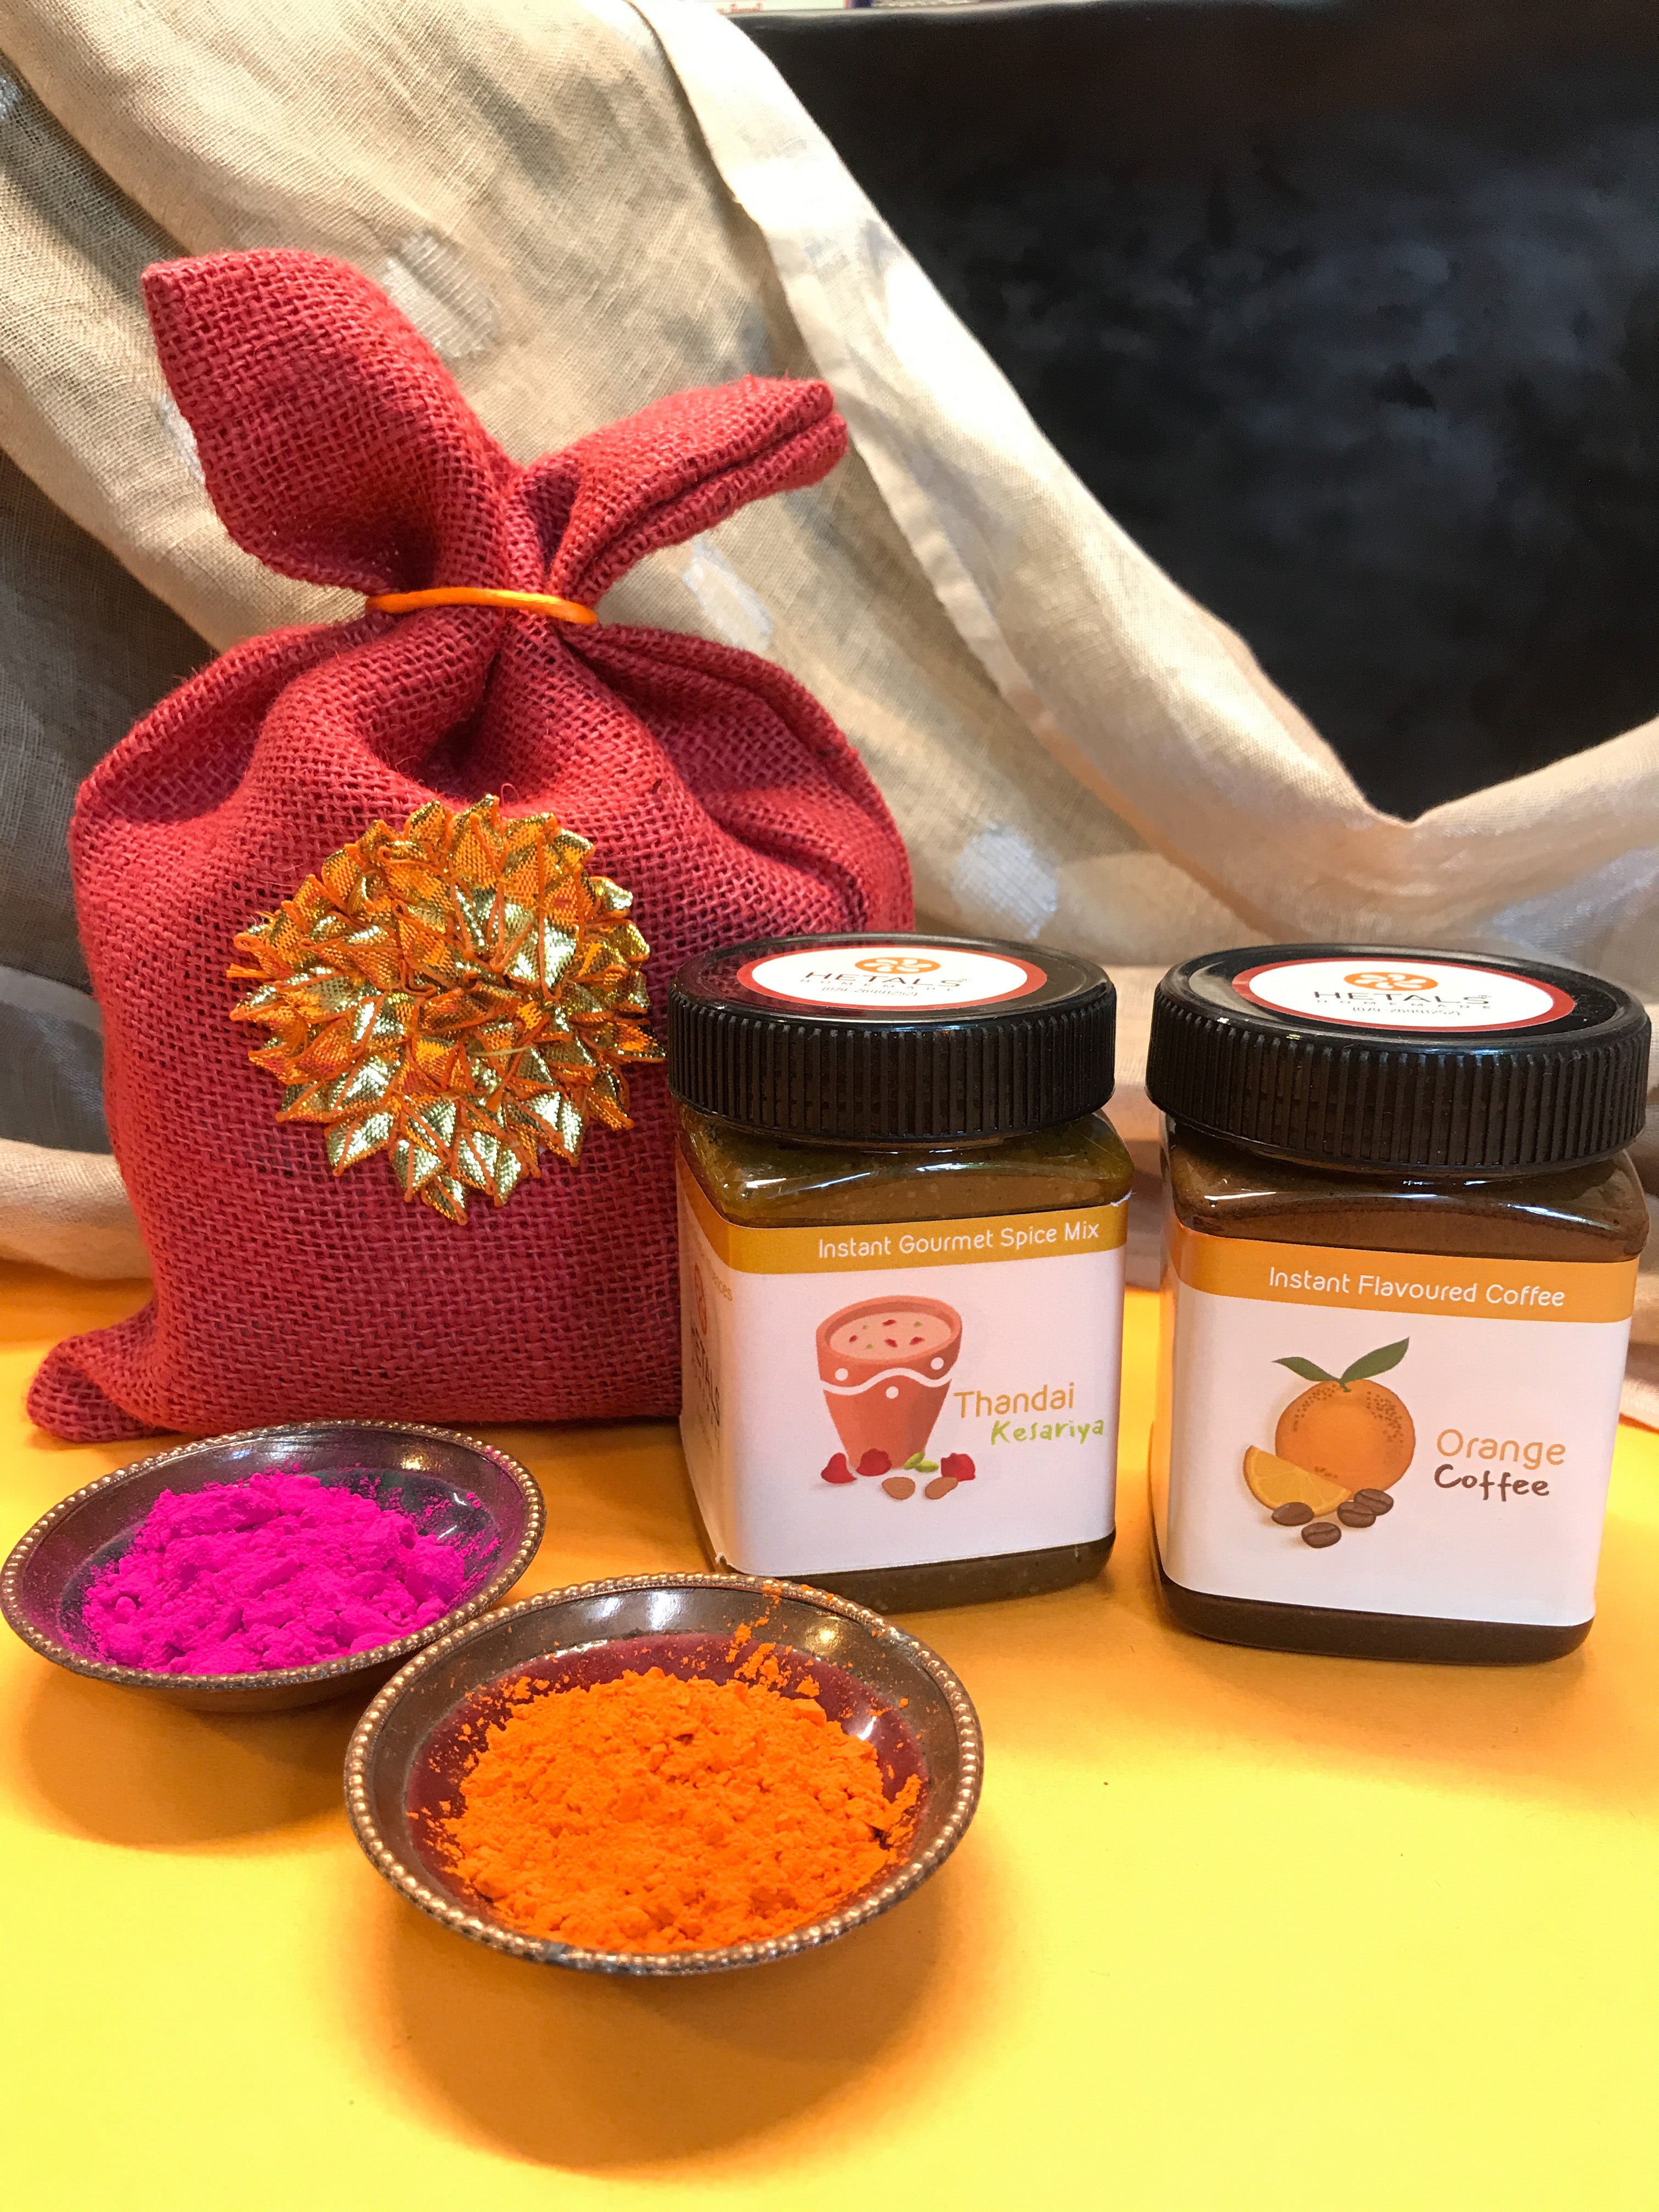 An image of Hetal's Homemade Holi Hamper. The hamper consists of two of our products, Thandai and Orange flavoured instant coffee. The image also shows the packaging of the hamper.